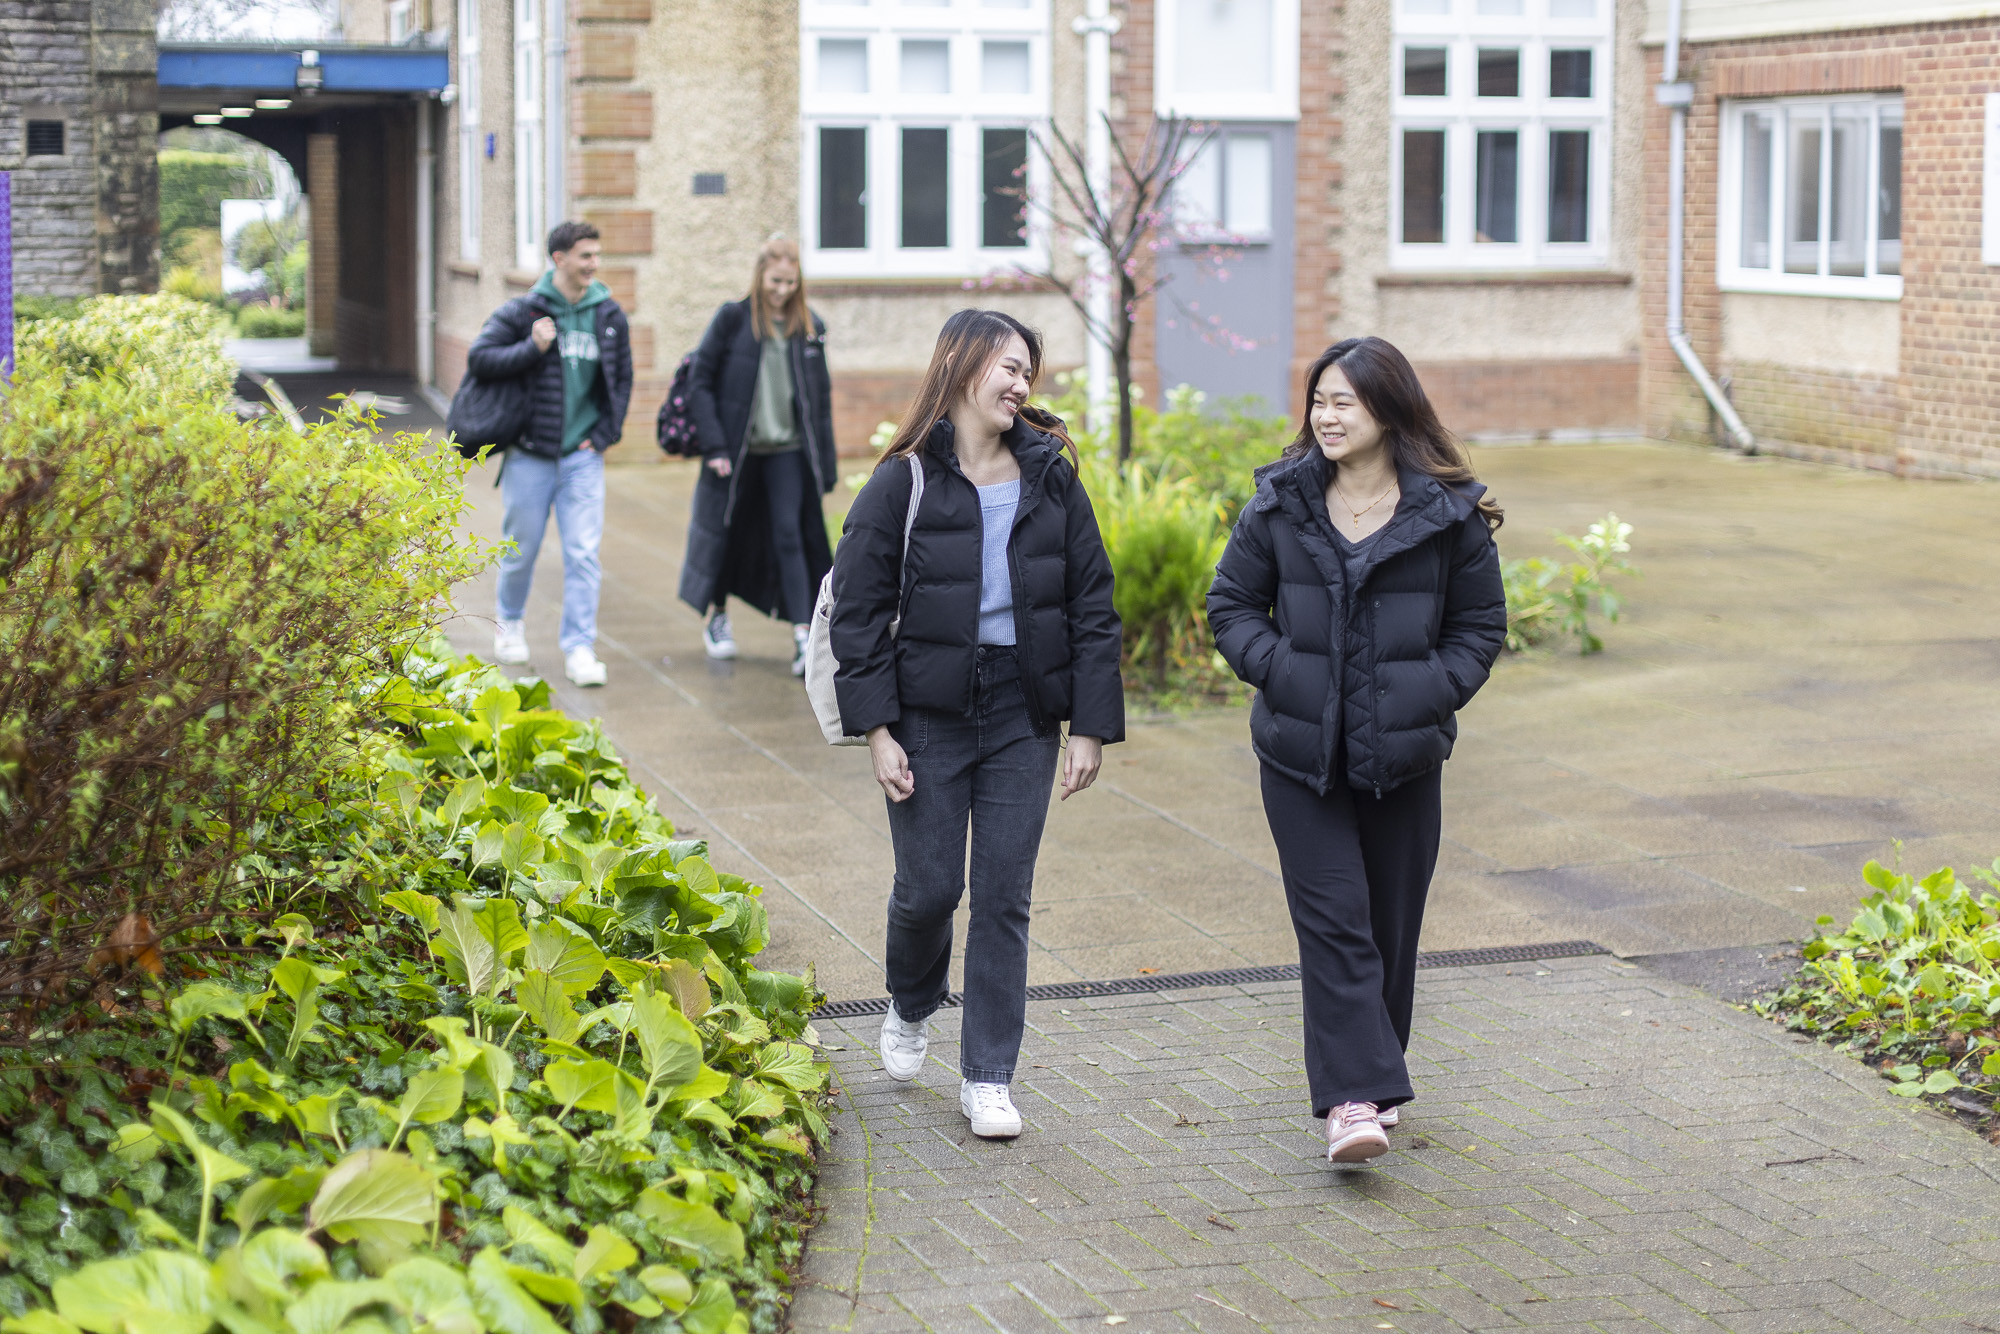 Students outside the main campus building, walking around